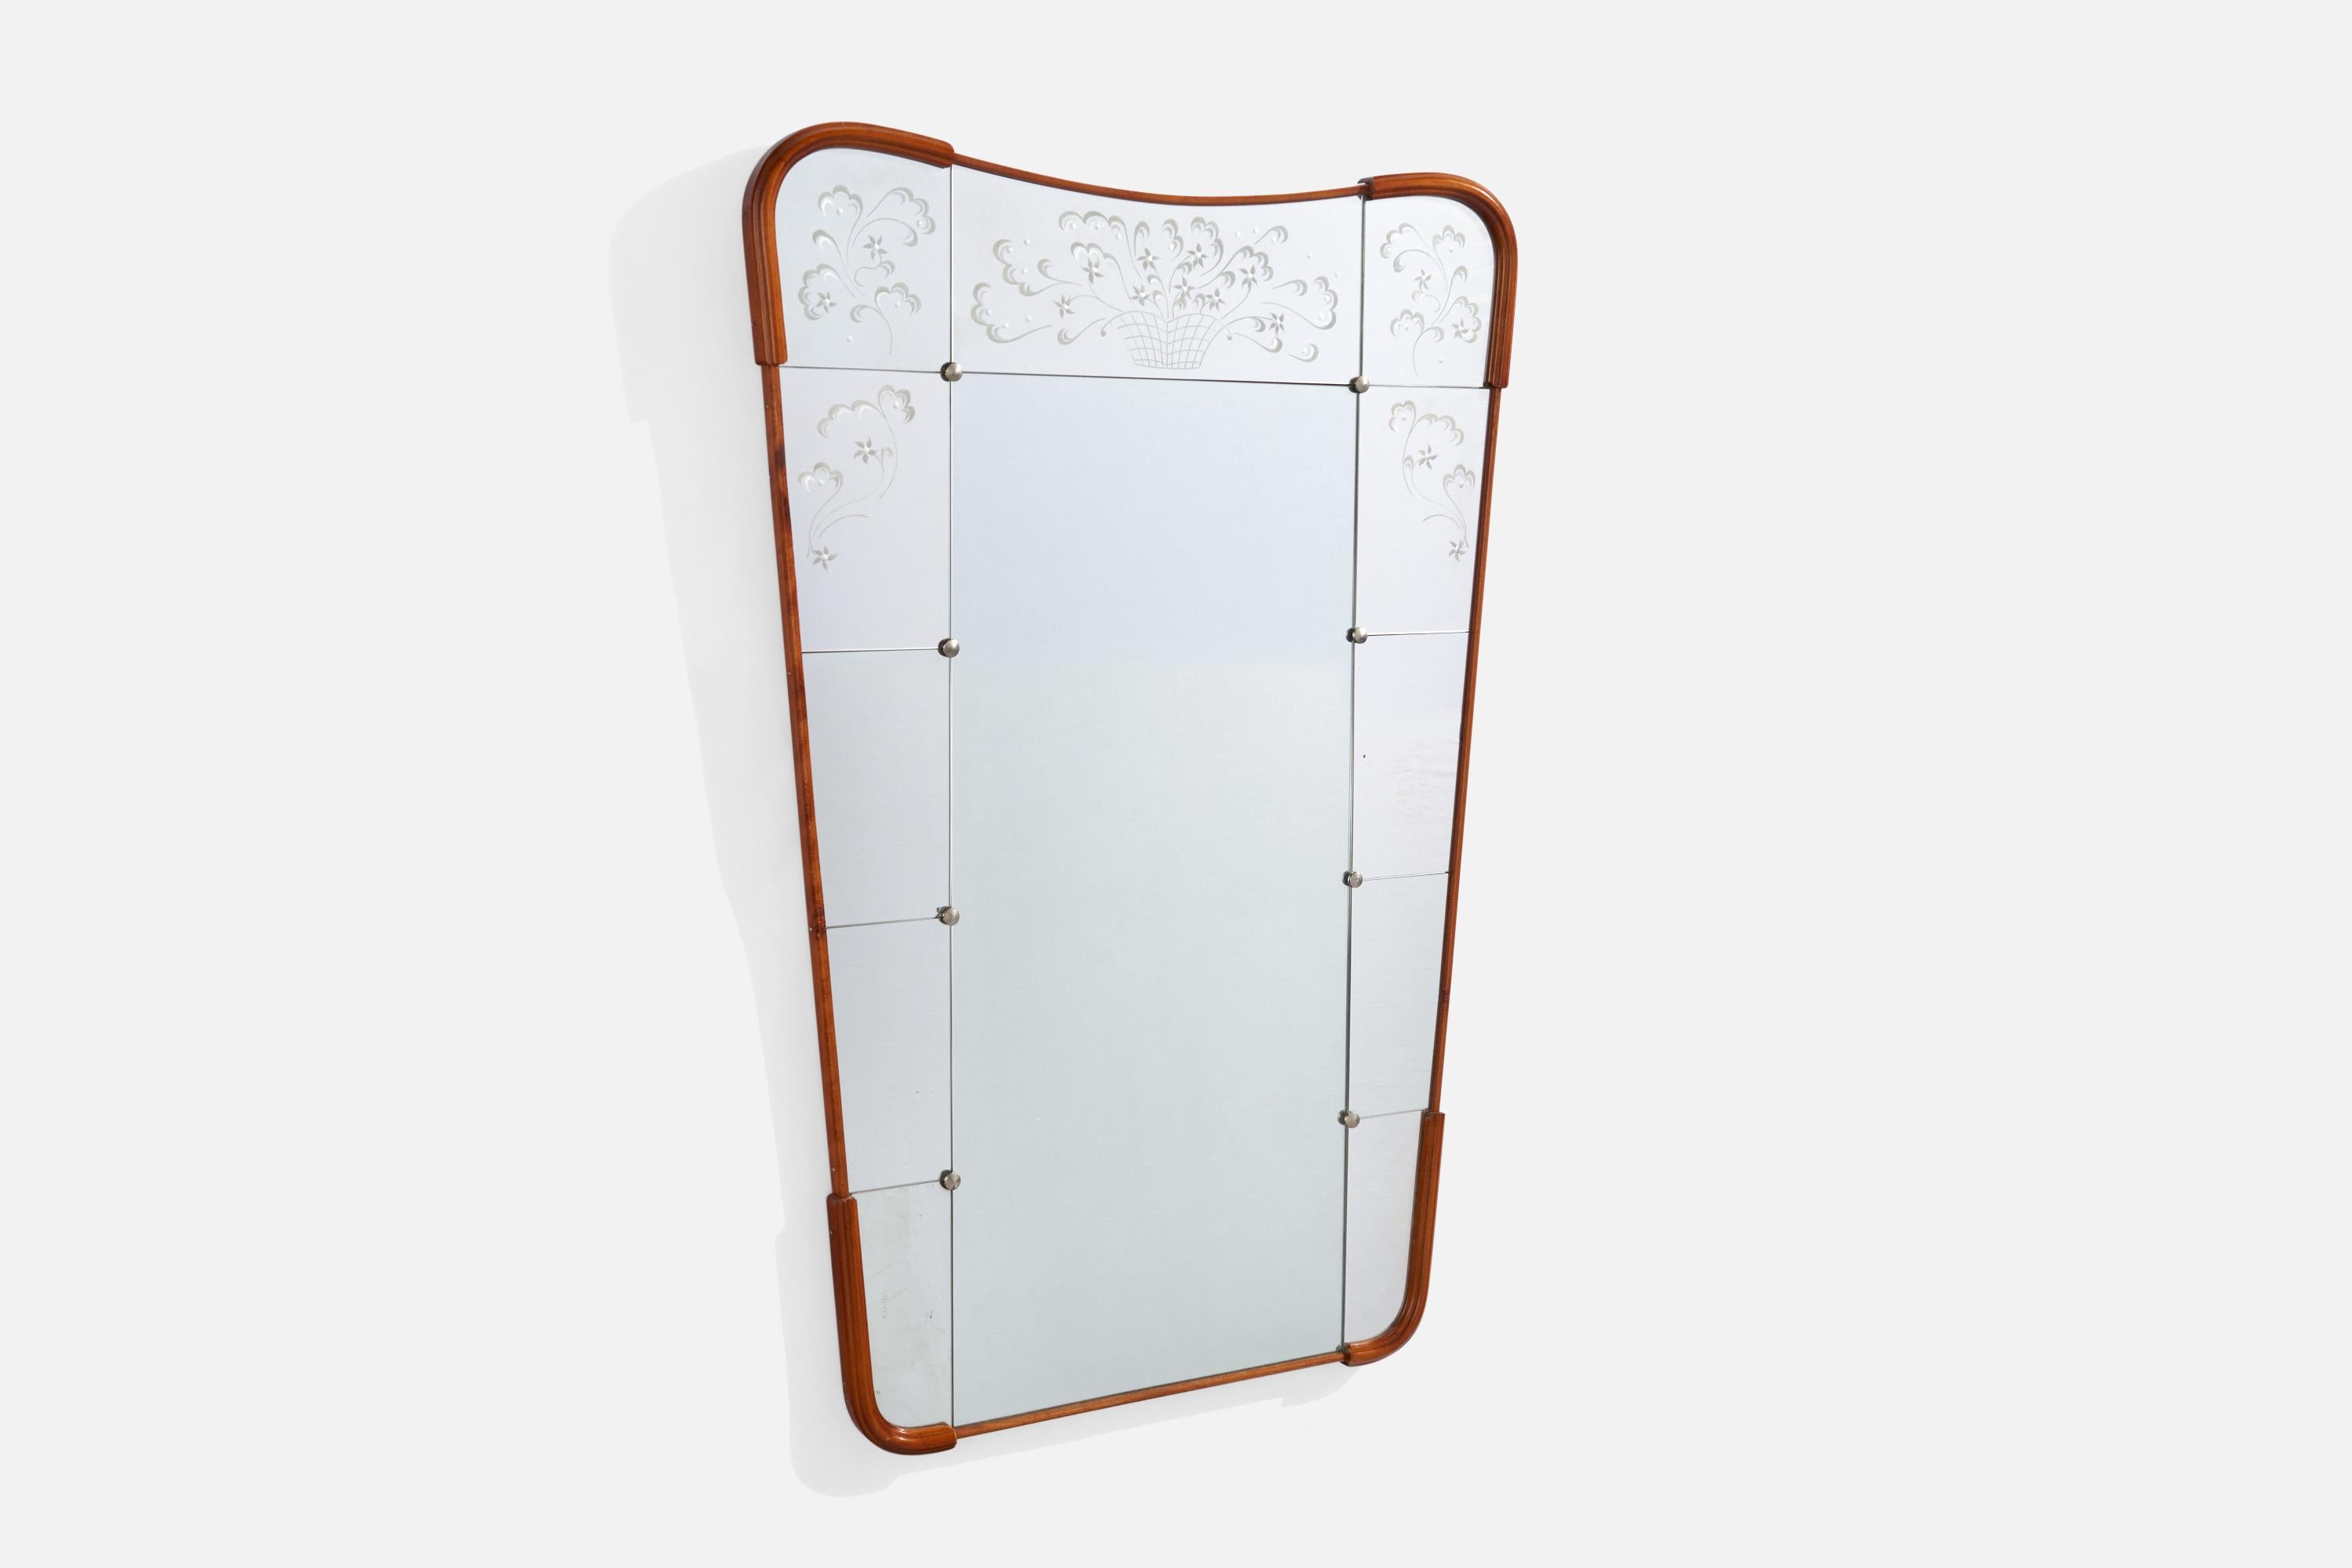 An etched glass, teak and metal wall mirror produced by Fröseke, Nybrofabriken, Sweden, 1954.